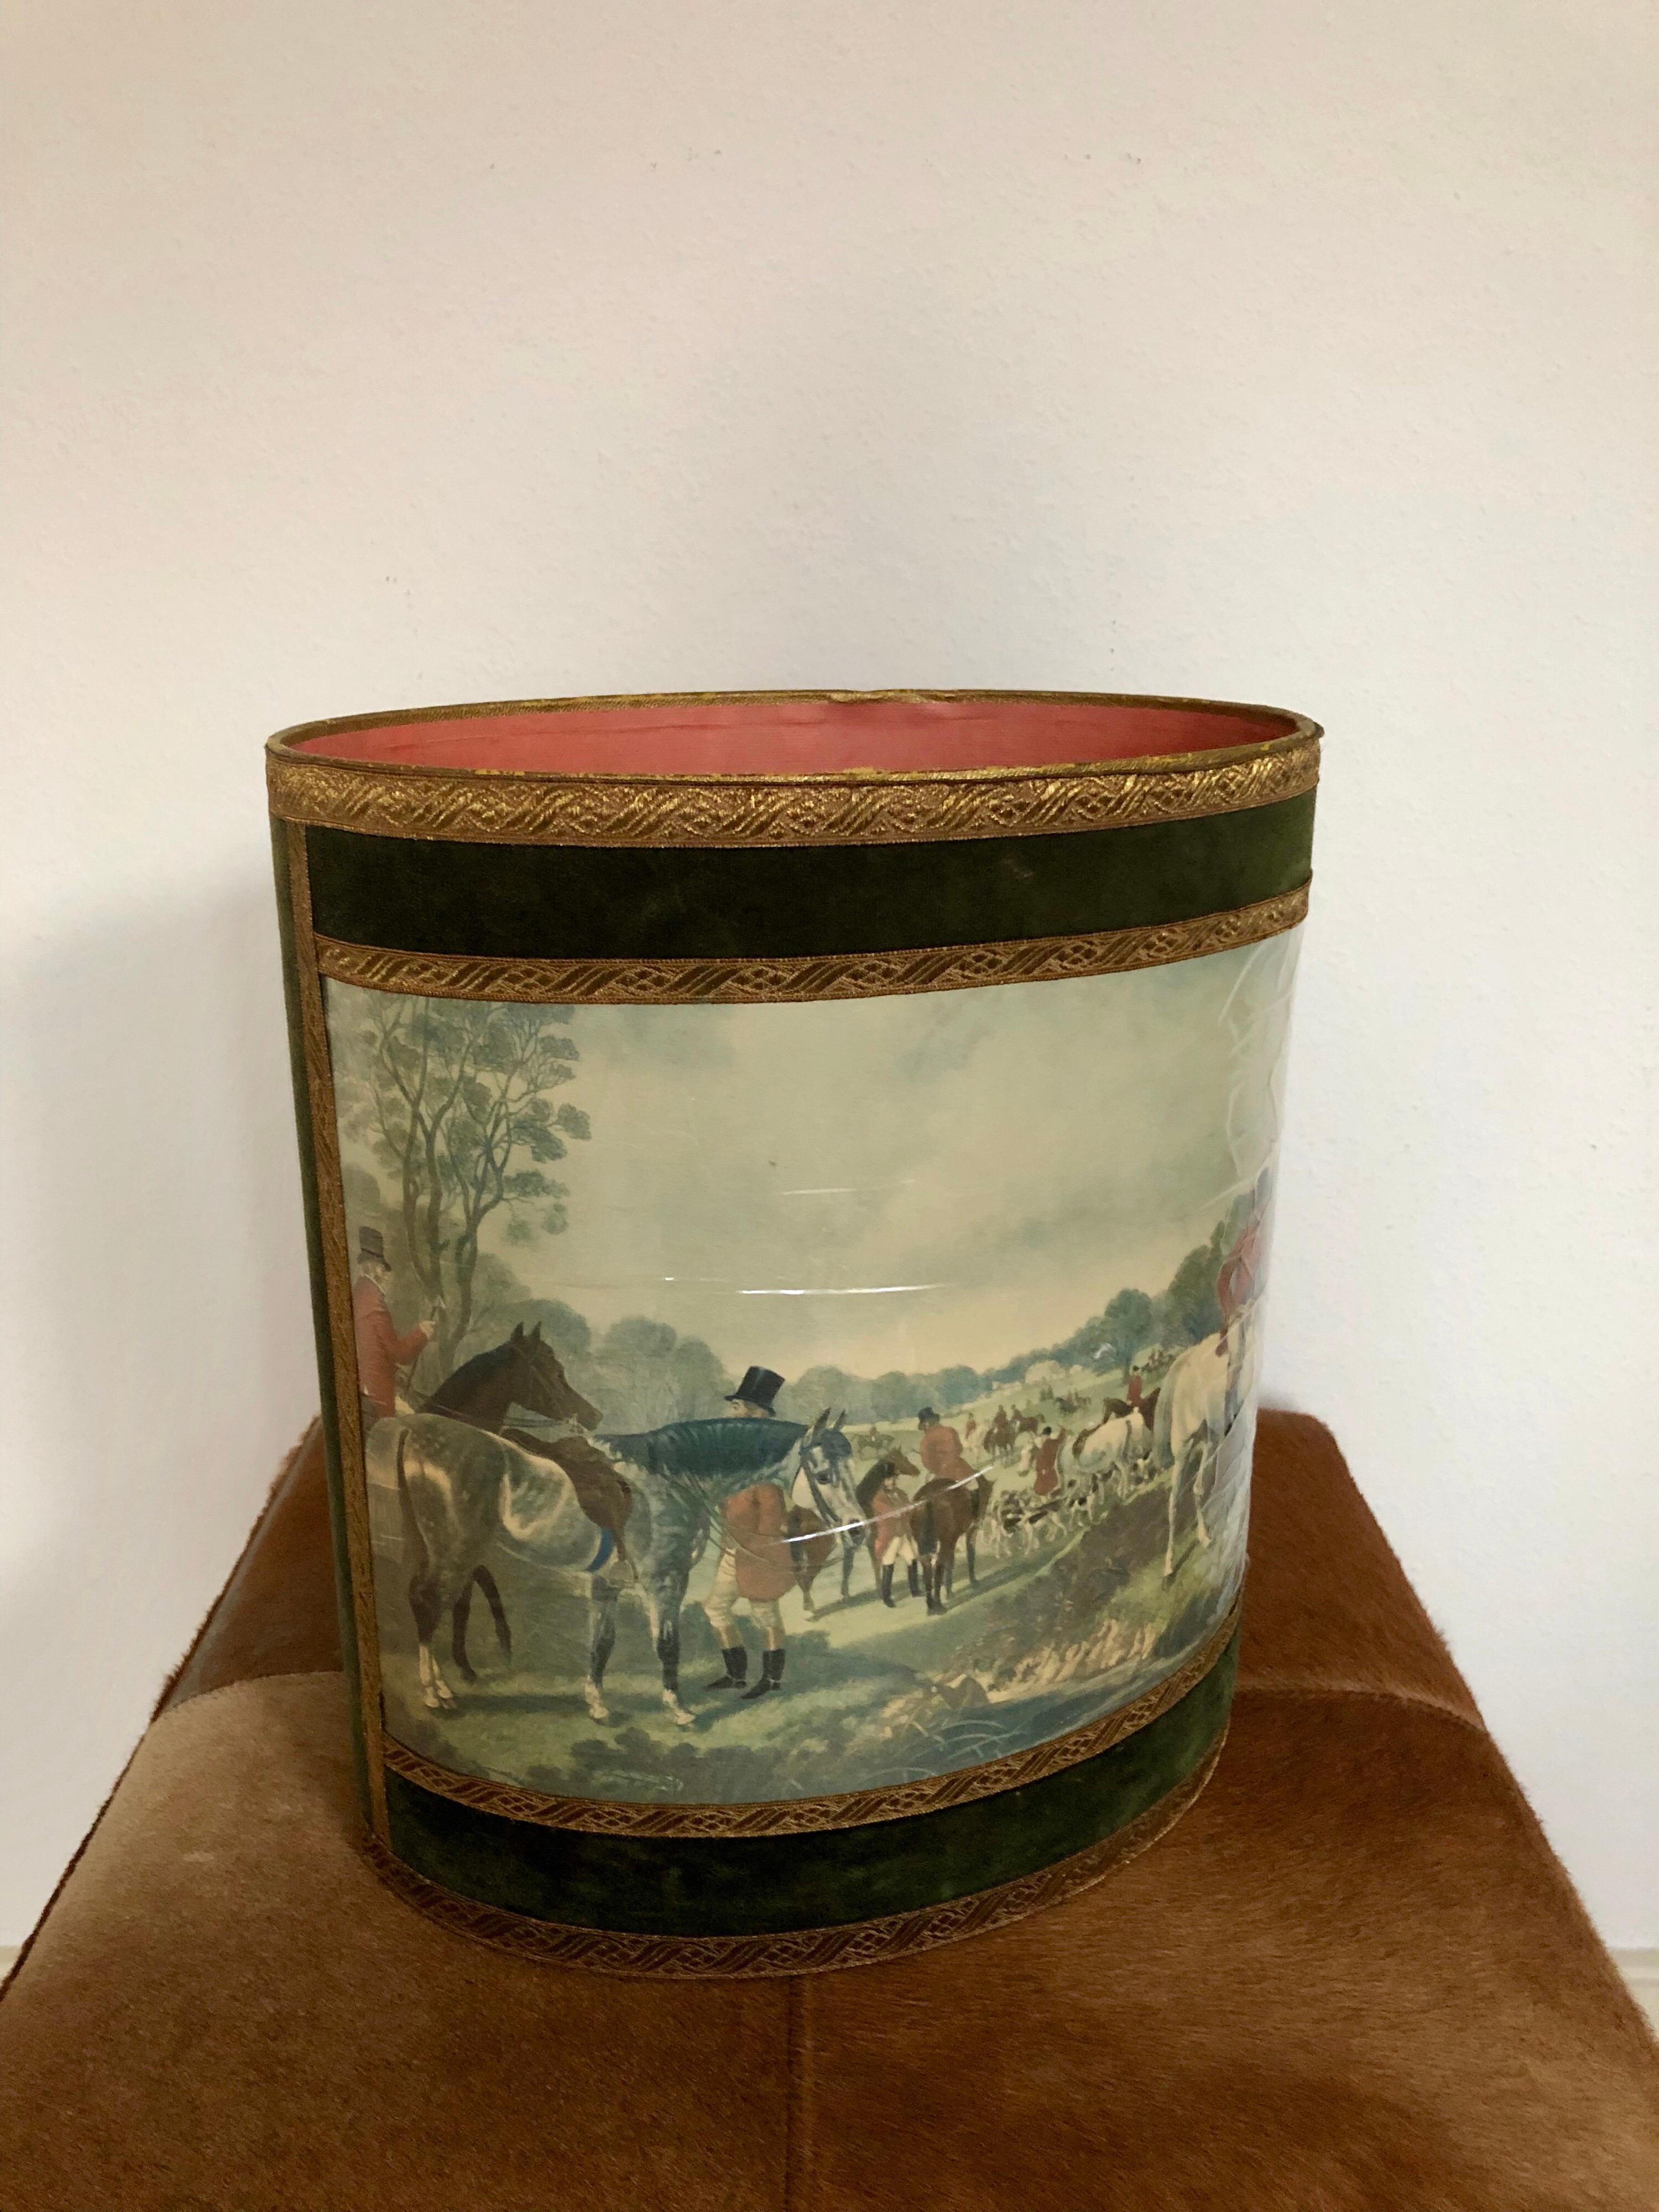 Authentic waste basket paper bin hunting scene, made in France, midcentury. No. 11.72.583.
 